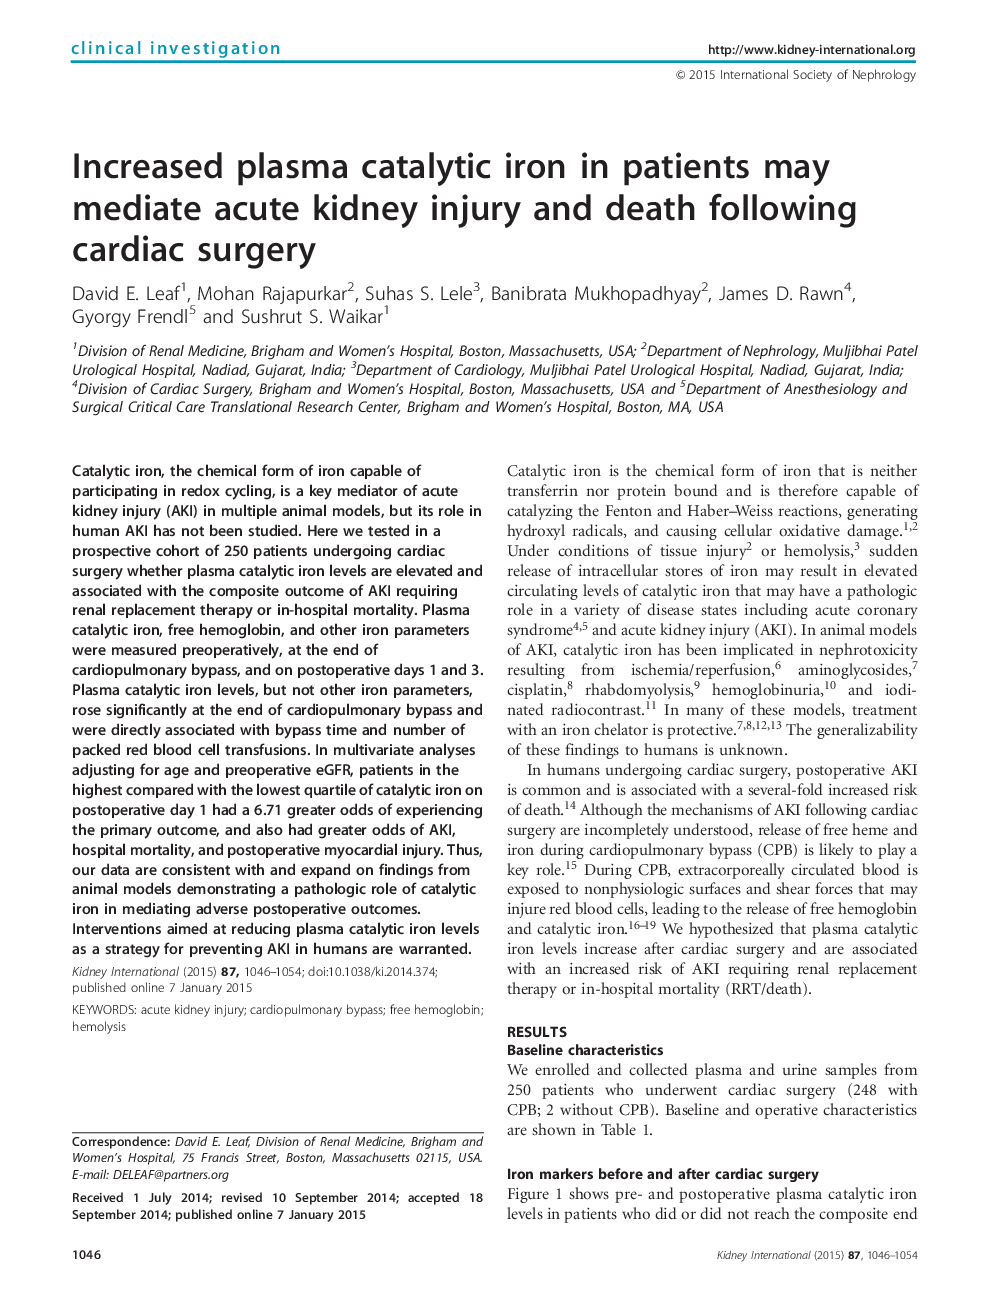 Increased plasma catalytic iron in patients may mediate acute kidney injury and death following cardiac surgery